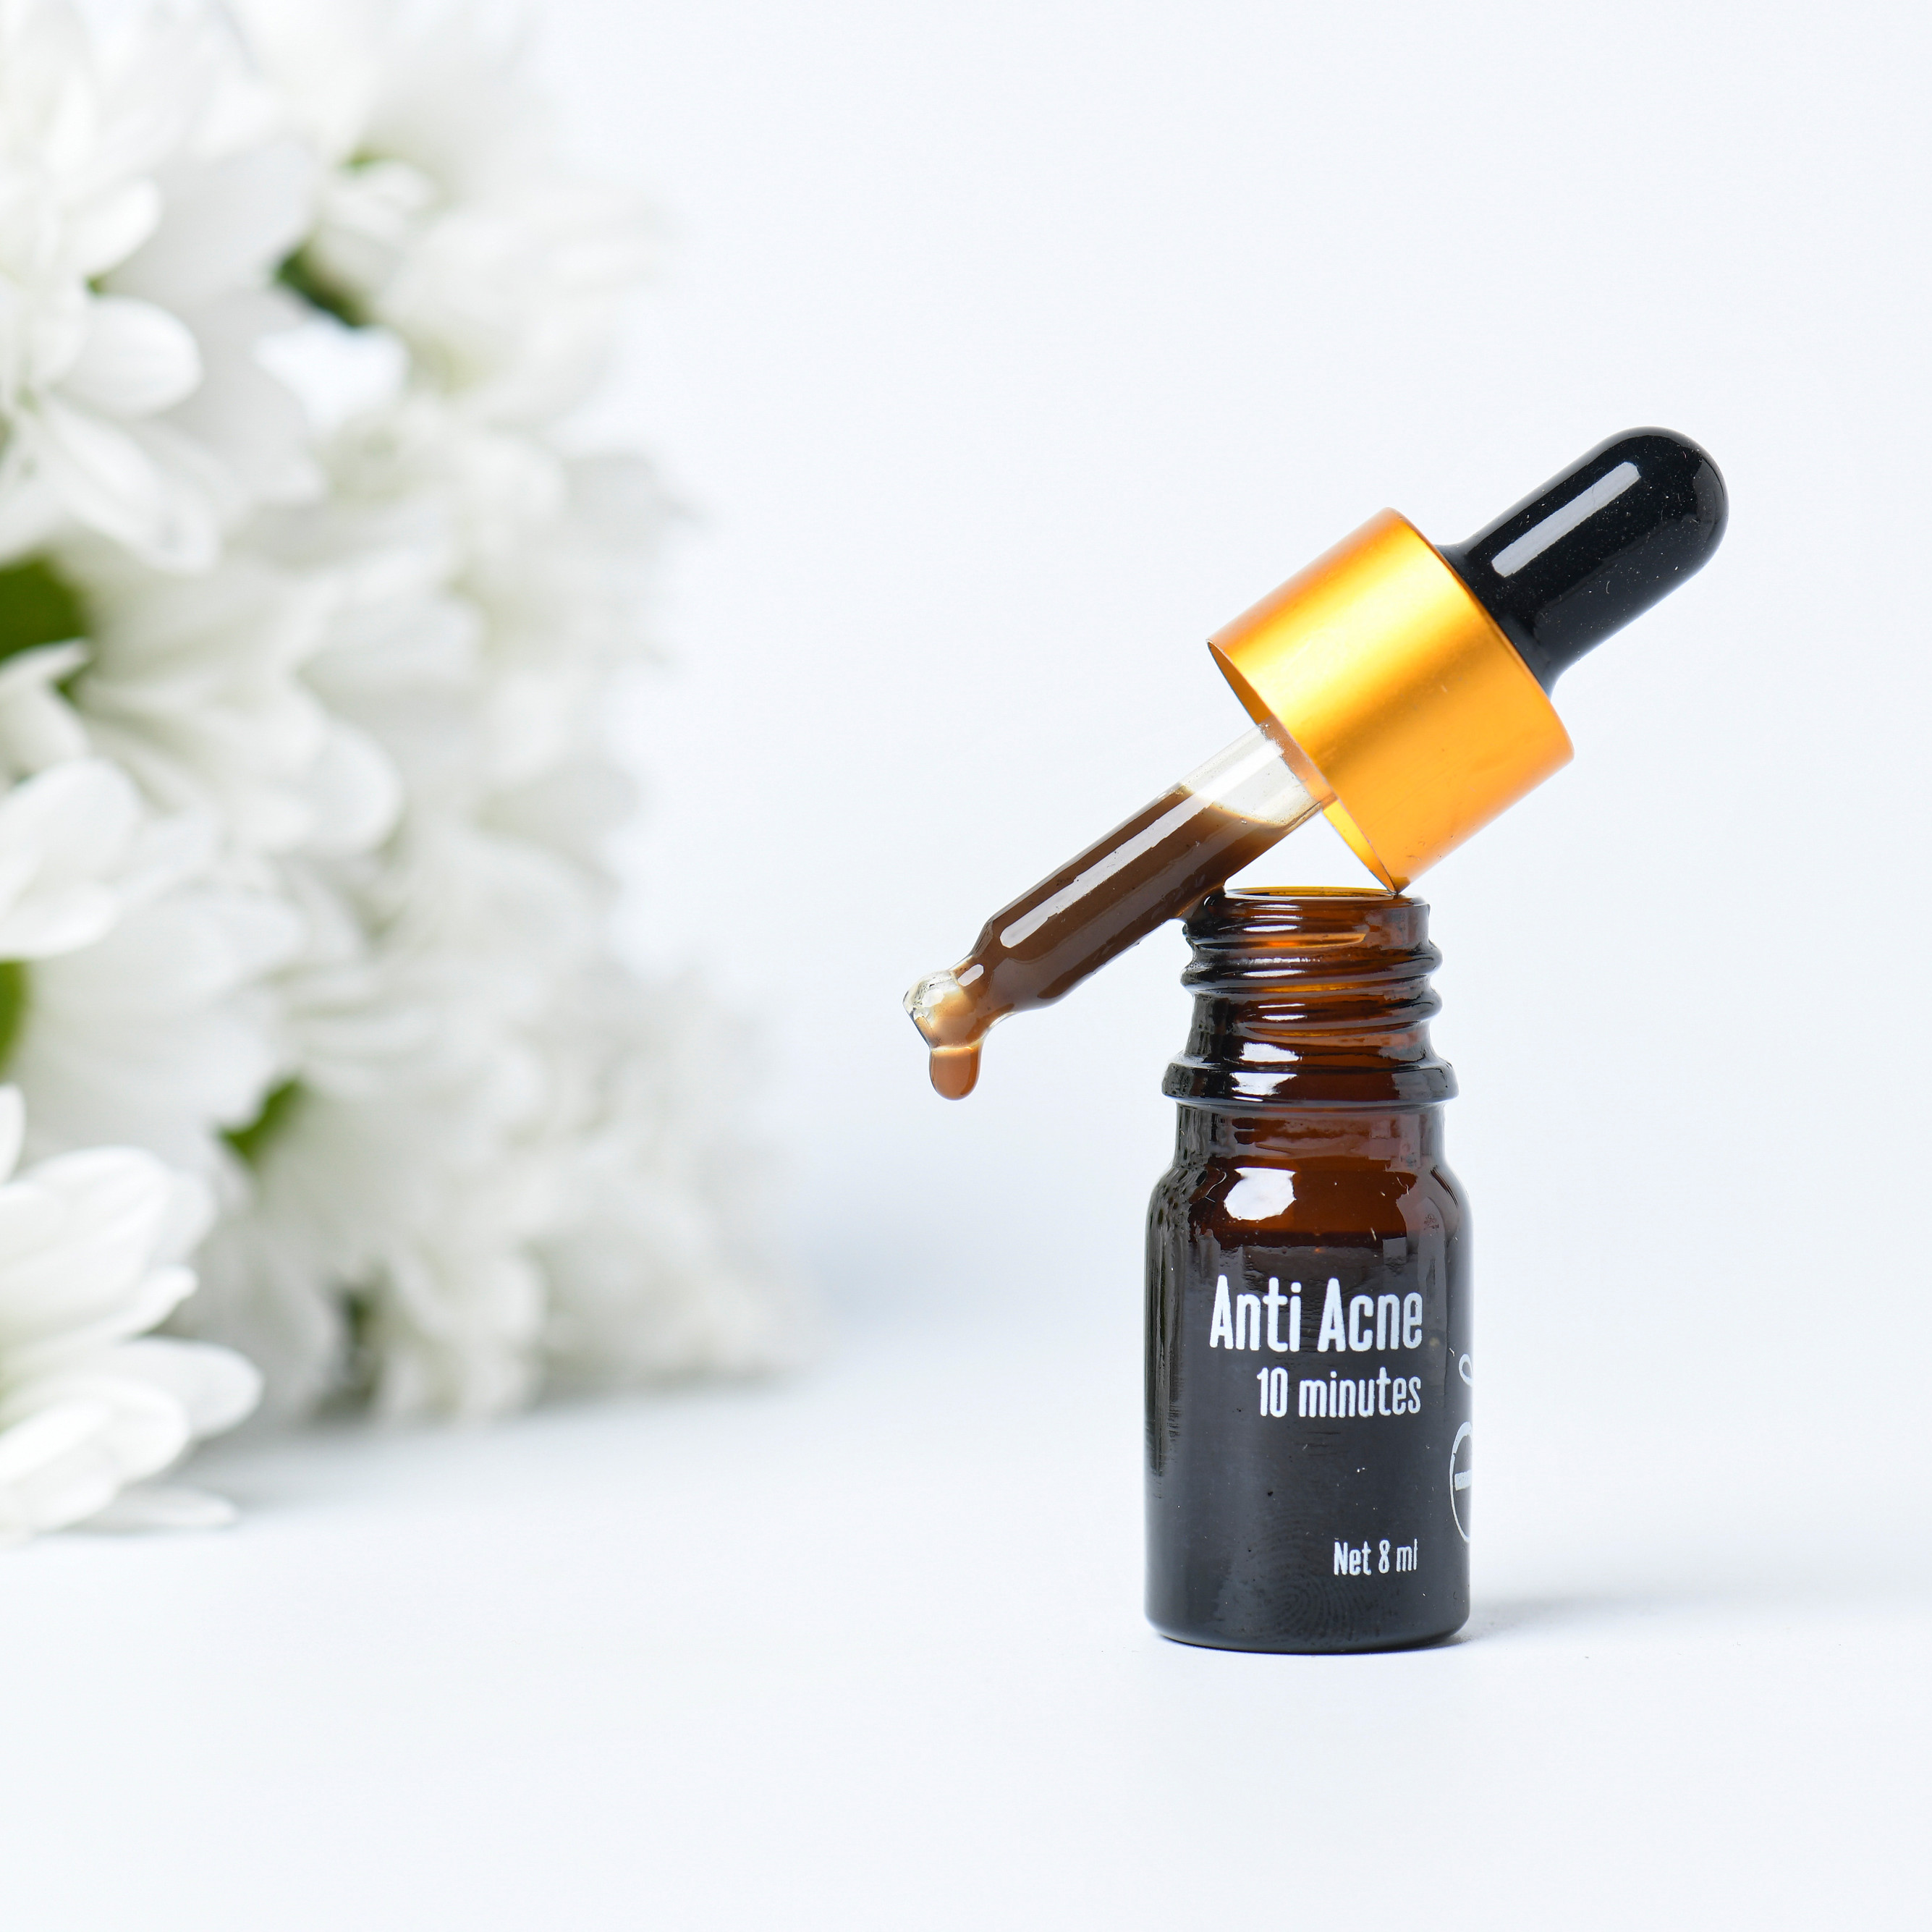 Dung dịch Relicos (serum mụn) - Relicos Anti Acne 10 minutes